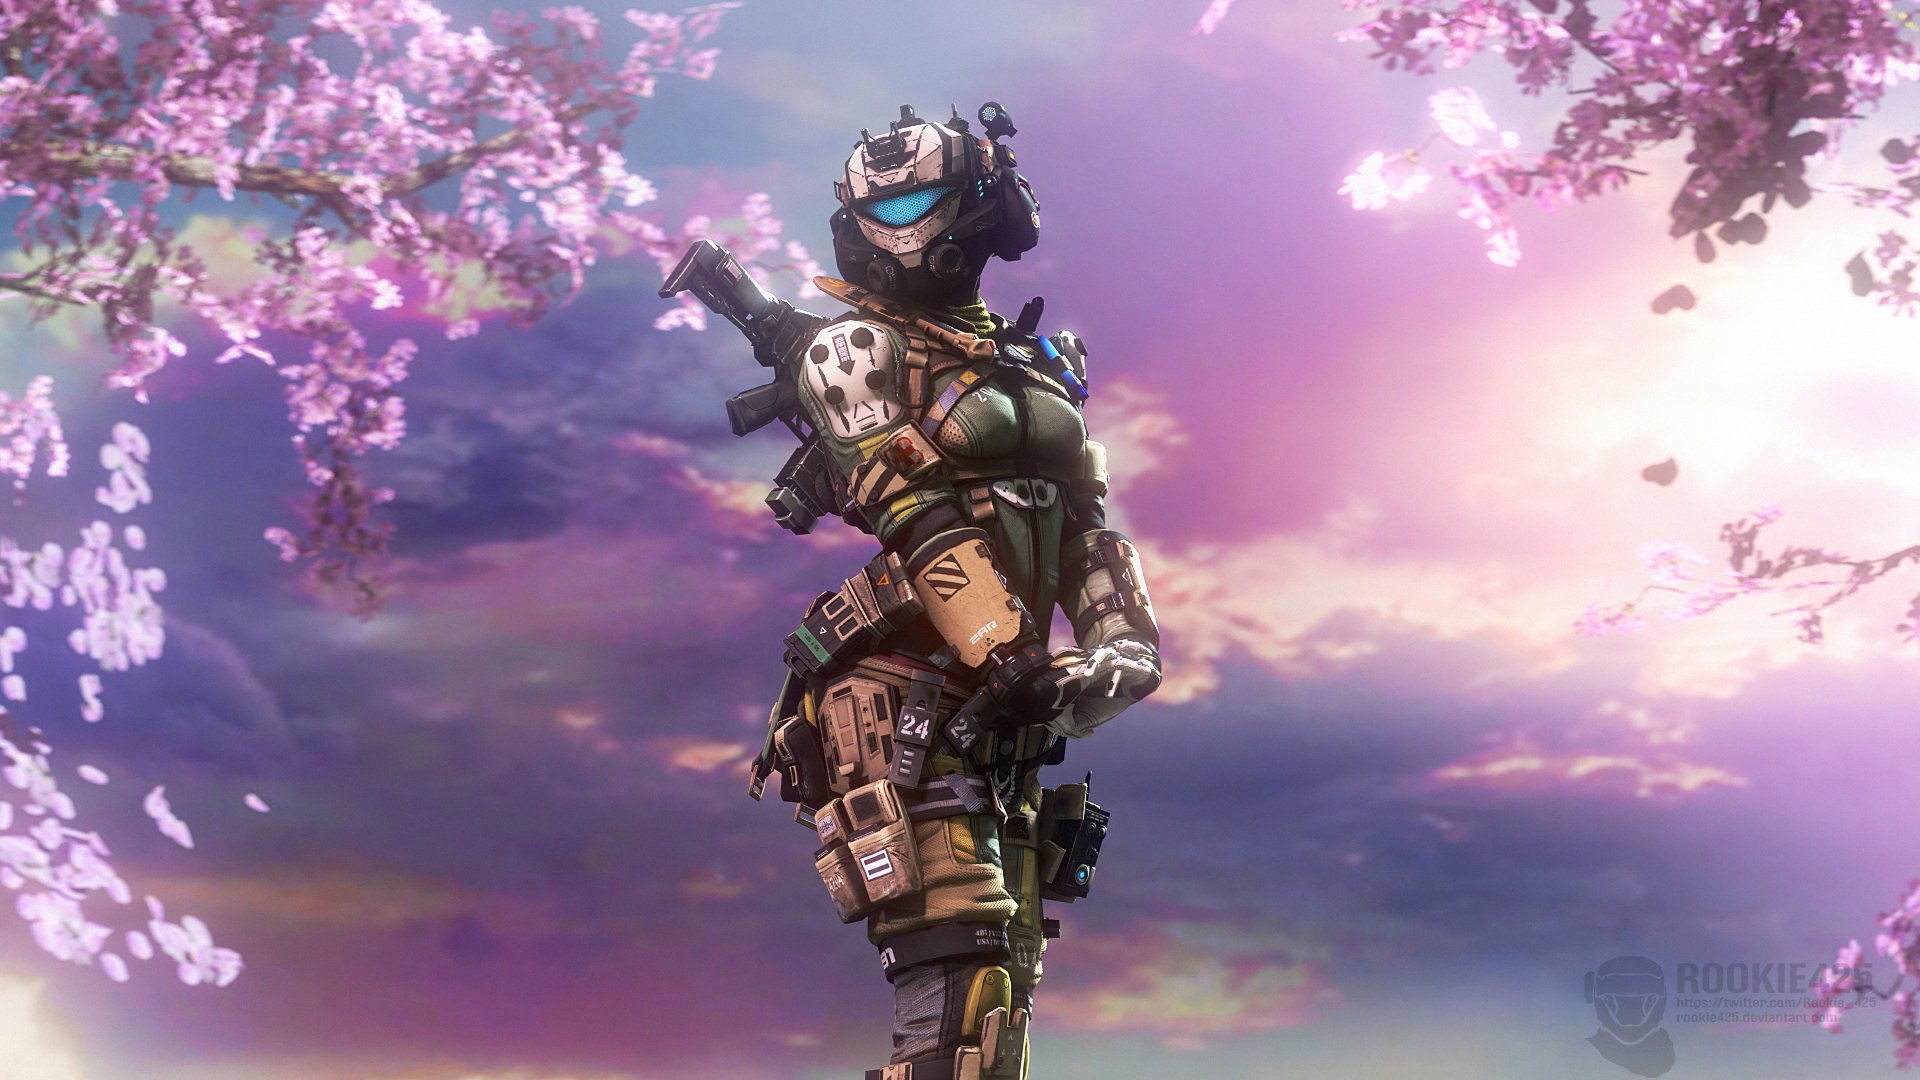 Video Game Titanfall 2 4k Ultra Hd Wallpaper By Rookie425